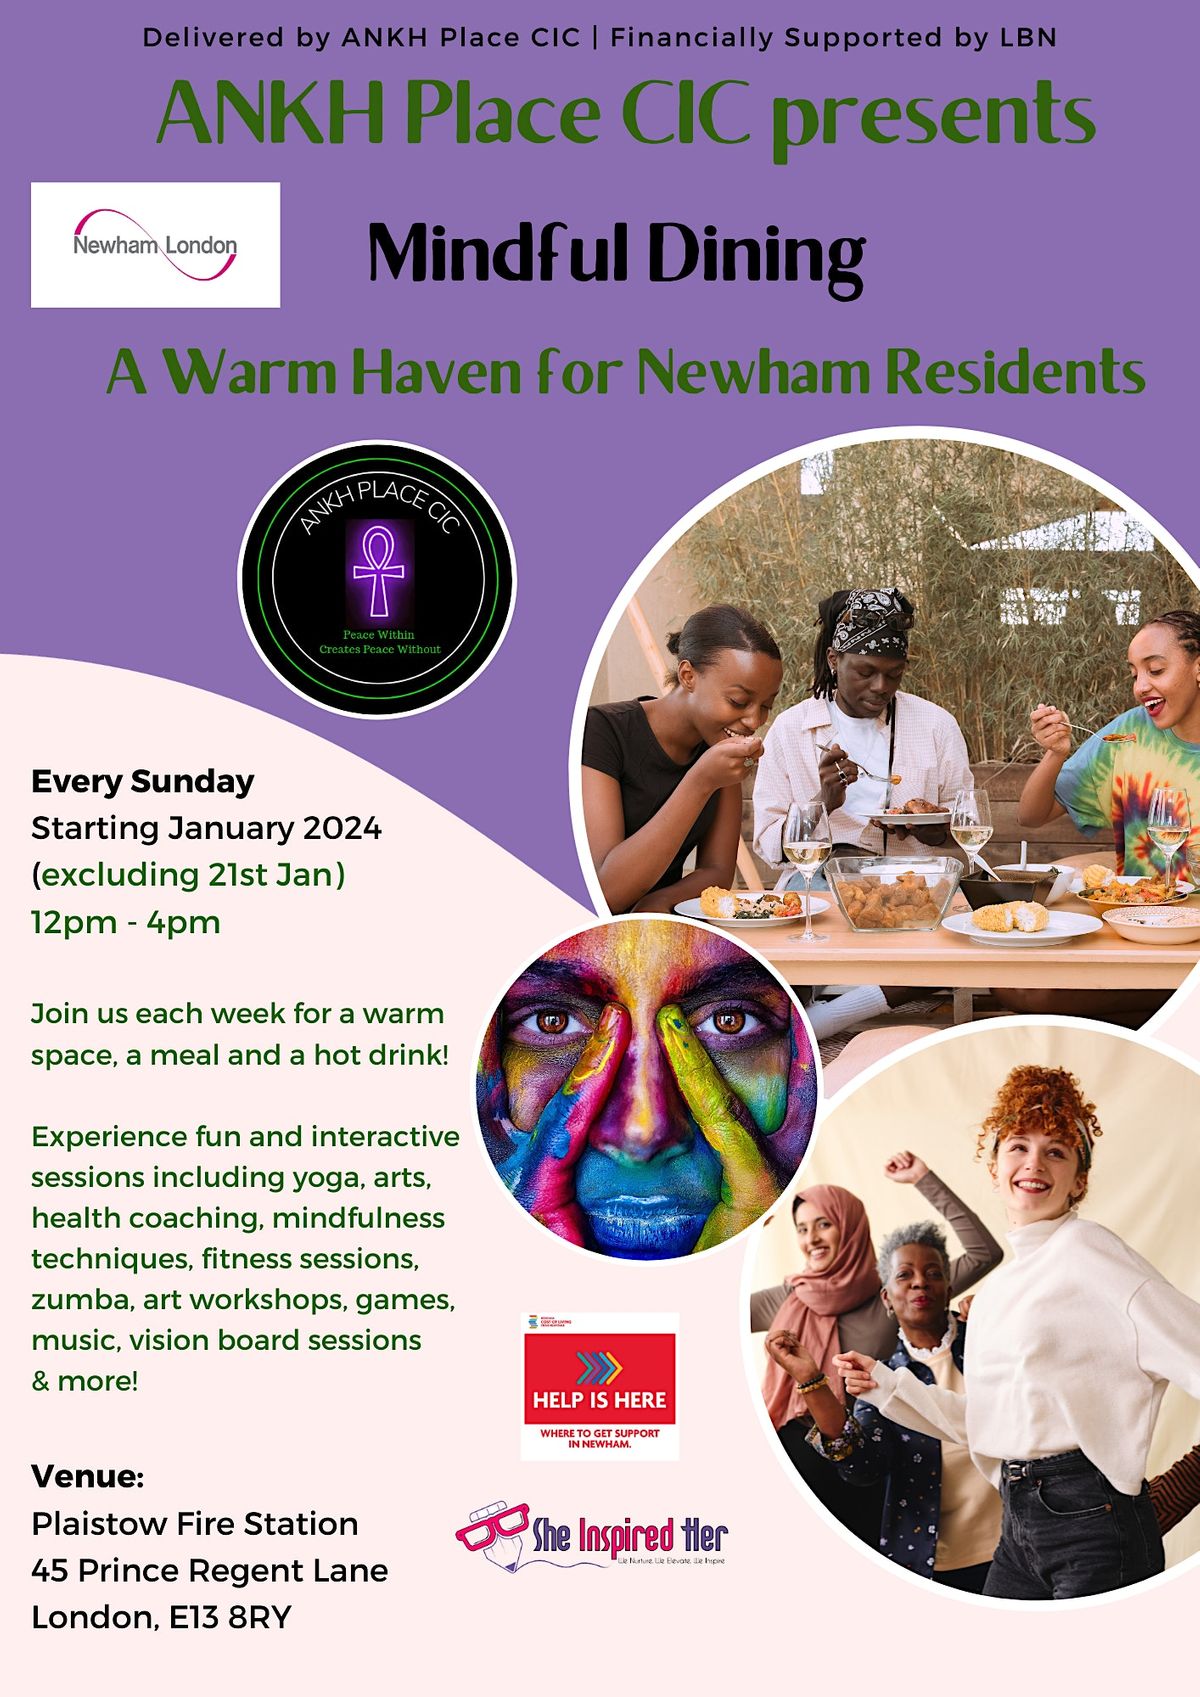 Mindful Dining- Sundays Lunch Dining & Sharing Journeys sessions